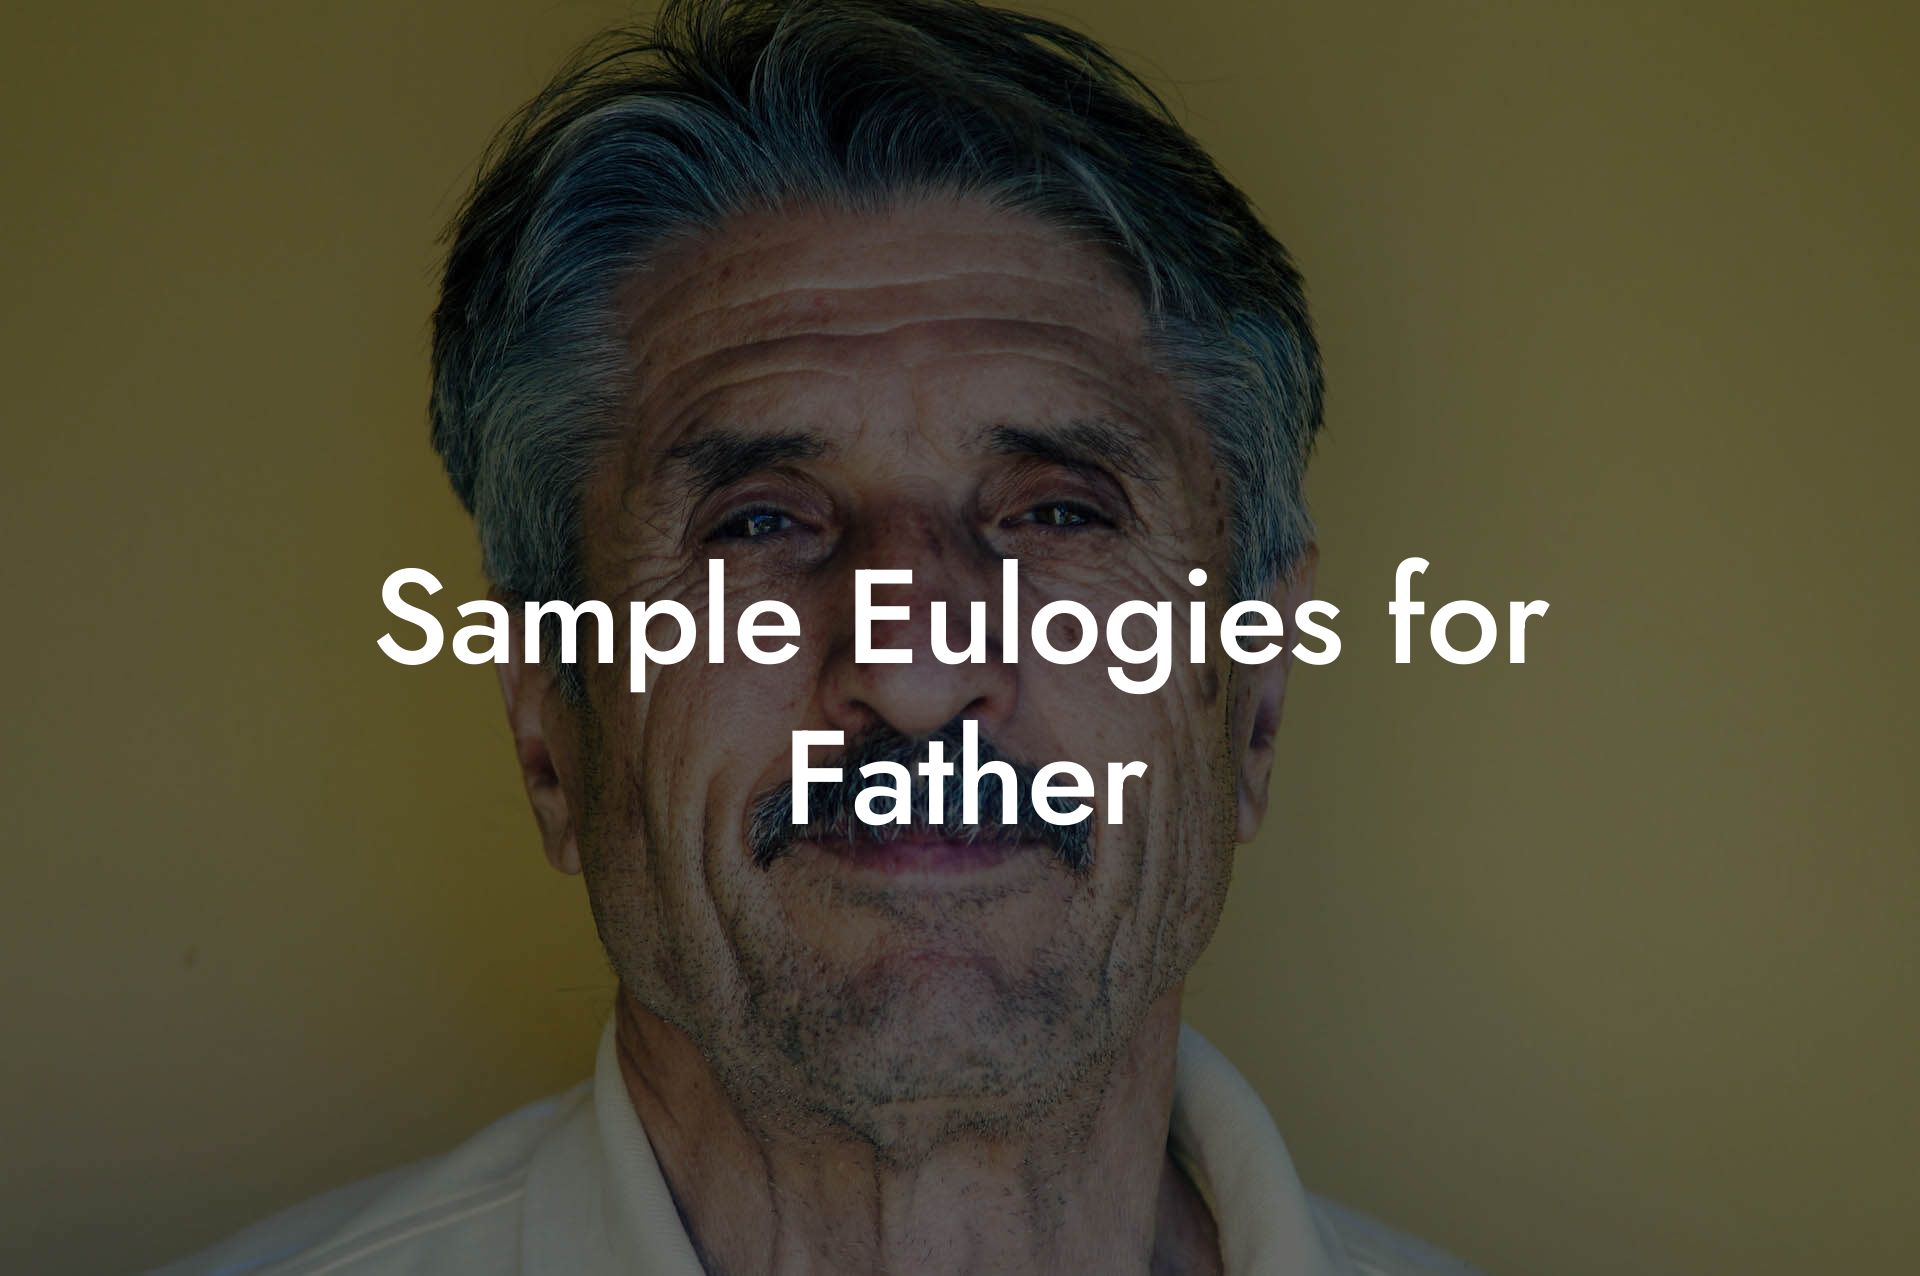 Sample Eulogies for Father